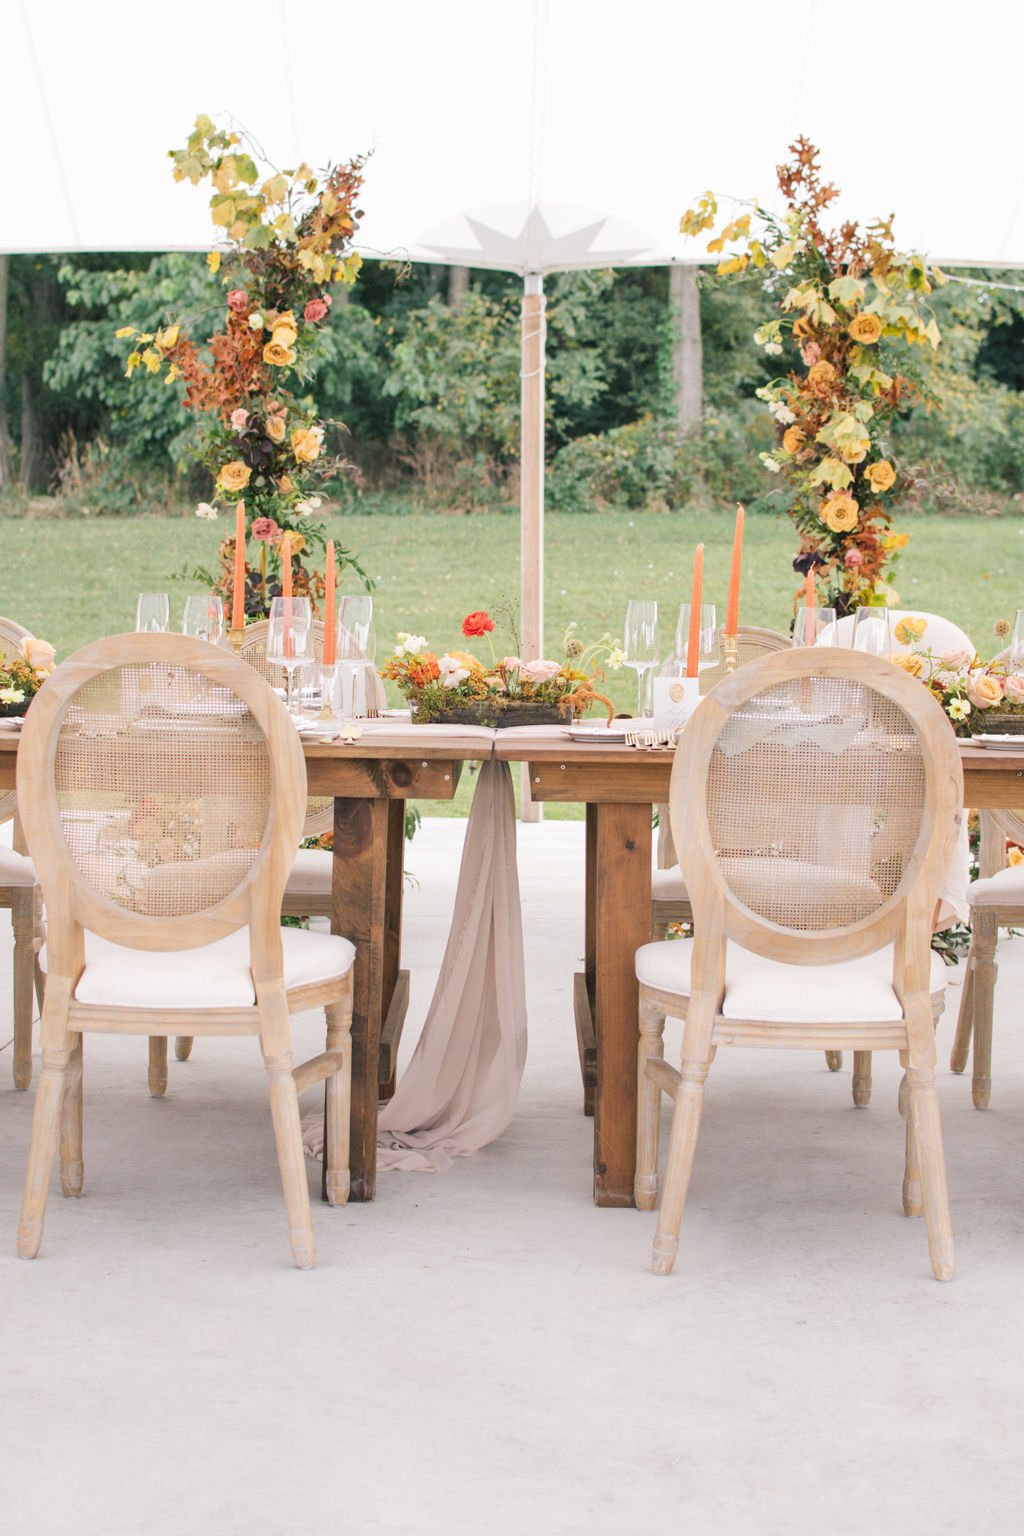 Sonoma wood chairs from Simply Beautiful Decor under the sailcloth tent at Wakefield Estate.